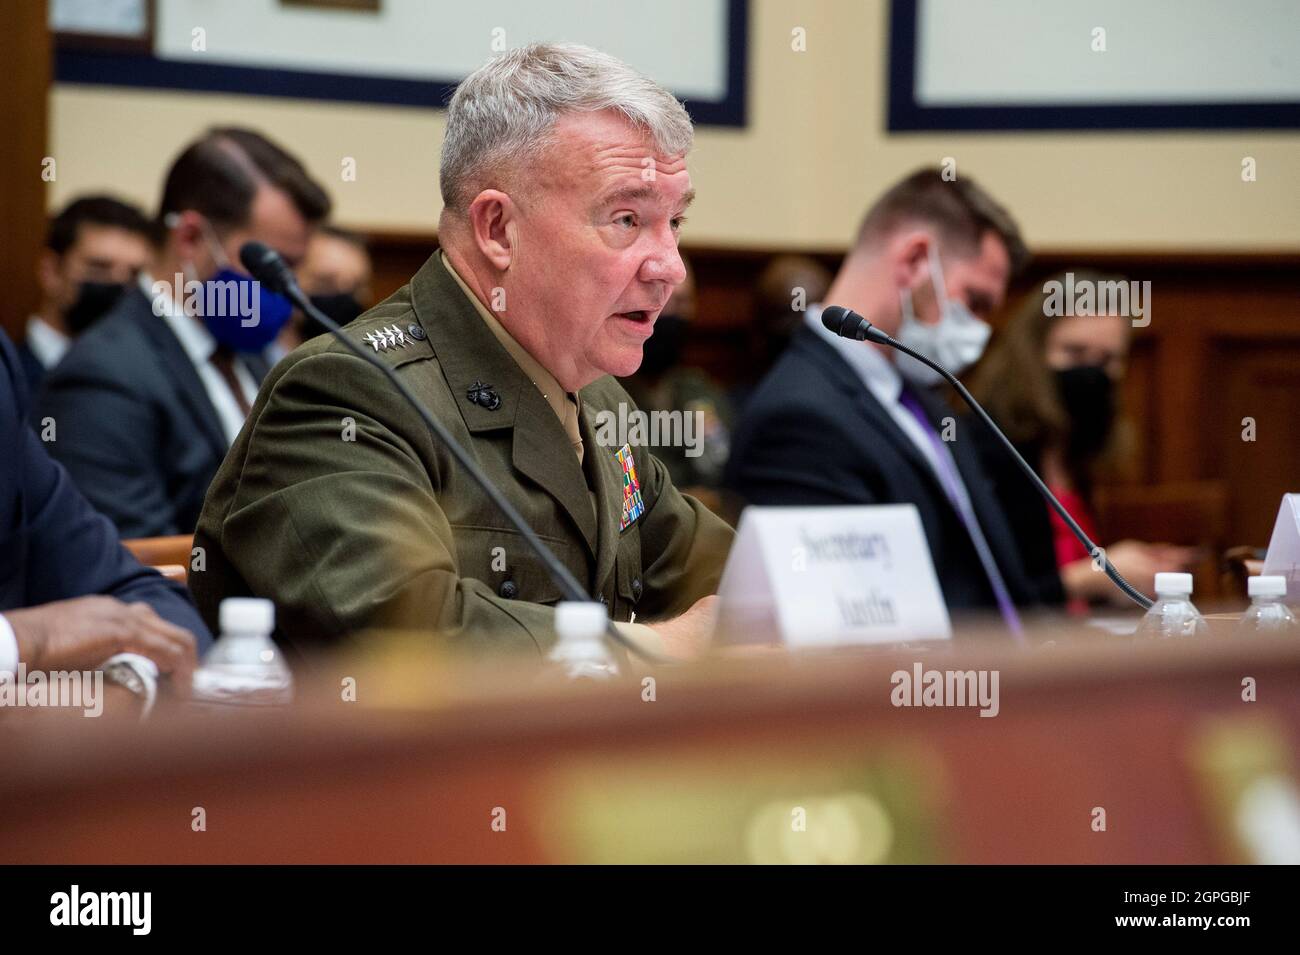 General Kenneth McKenzie Jr., USMC Commander, U.S. Central Command responds to questions during a House Armed Services Committee hearing on “Ending the U.S. Military Mission in Afghanistan” in the Rayburn House Office Building in Washington, DC, Wednesday, September 29, 2021. (Photo by  Rod Lamkey/Pool/Sipa USA) Stock Photo